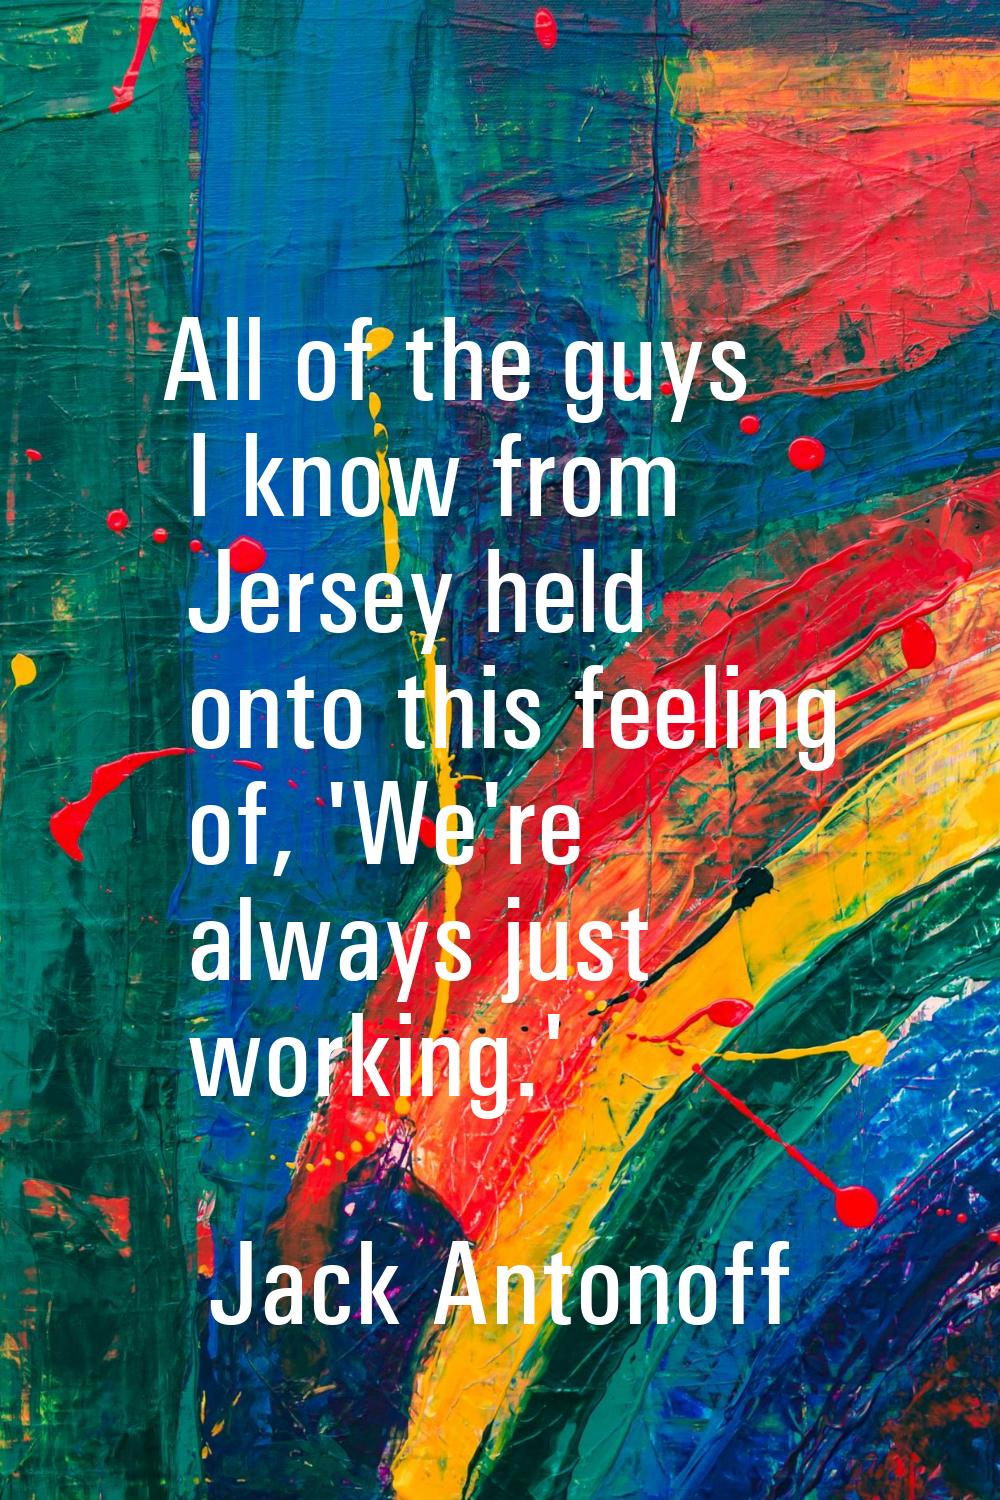 All of the guys I know from Jersey held onto this feeling of, 'We're always just working.'